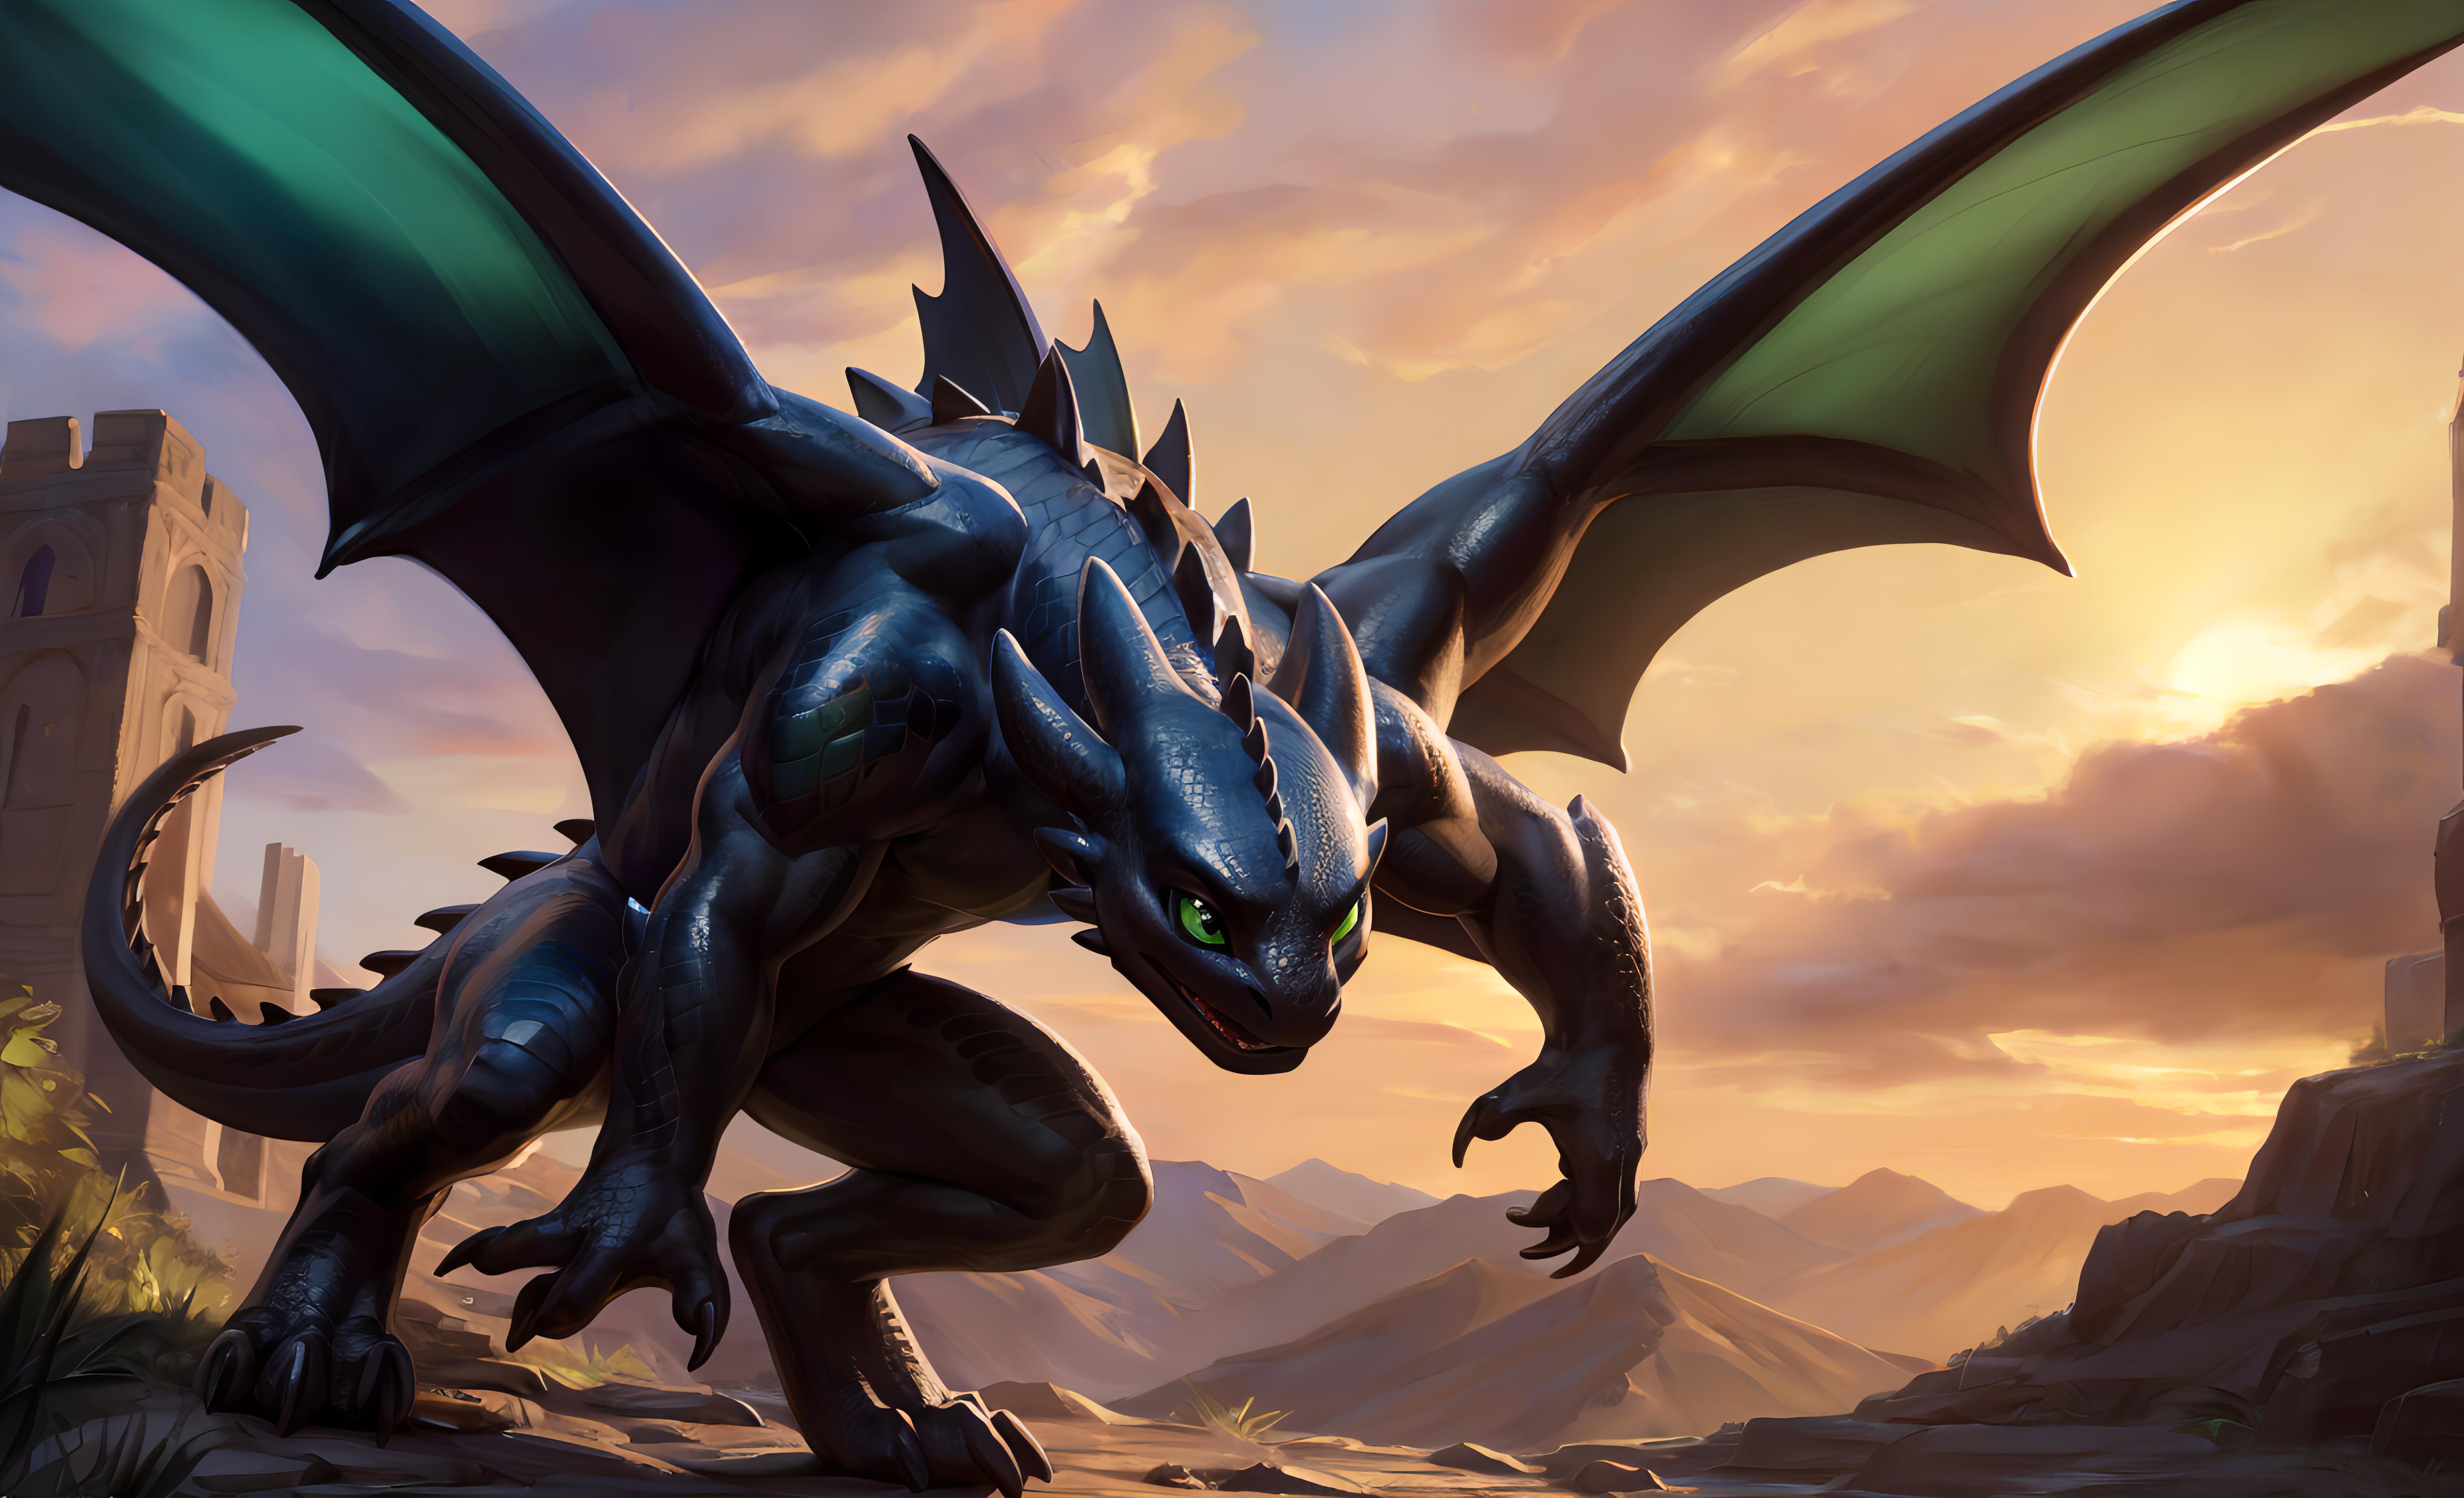 Toothless (HTTYD) image by Cynfall